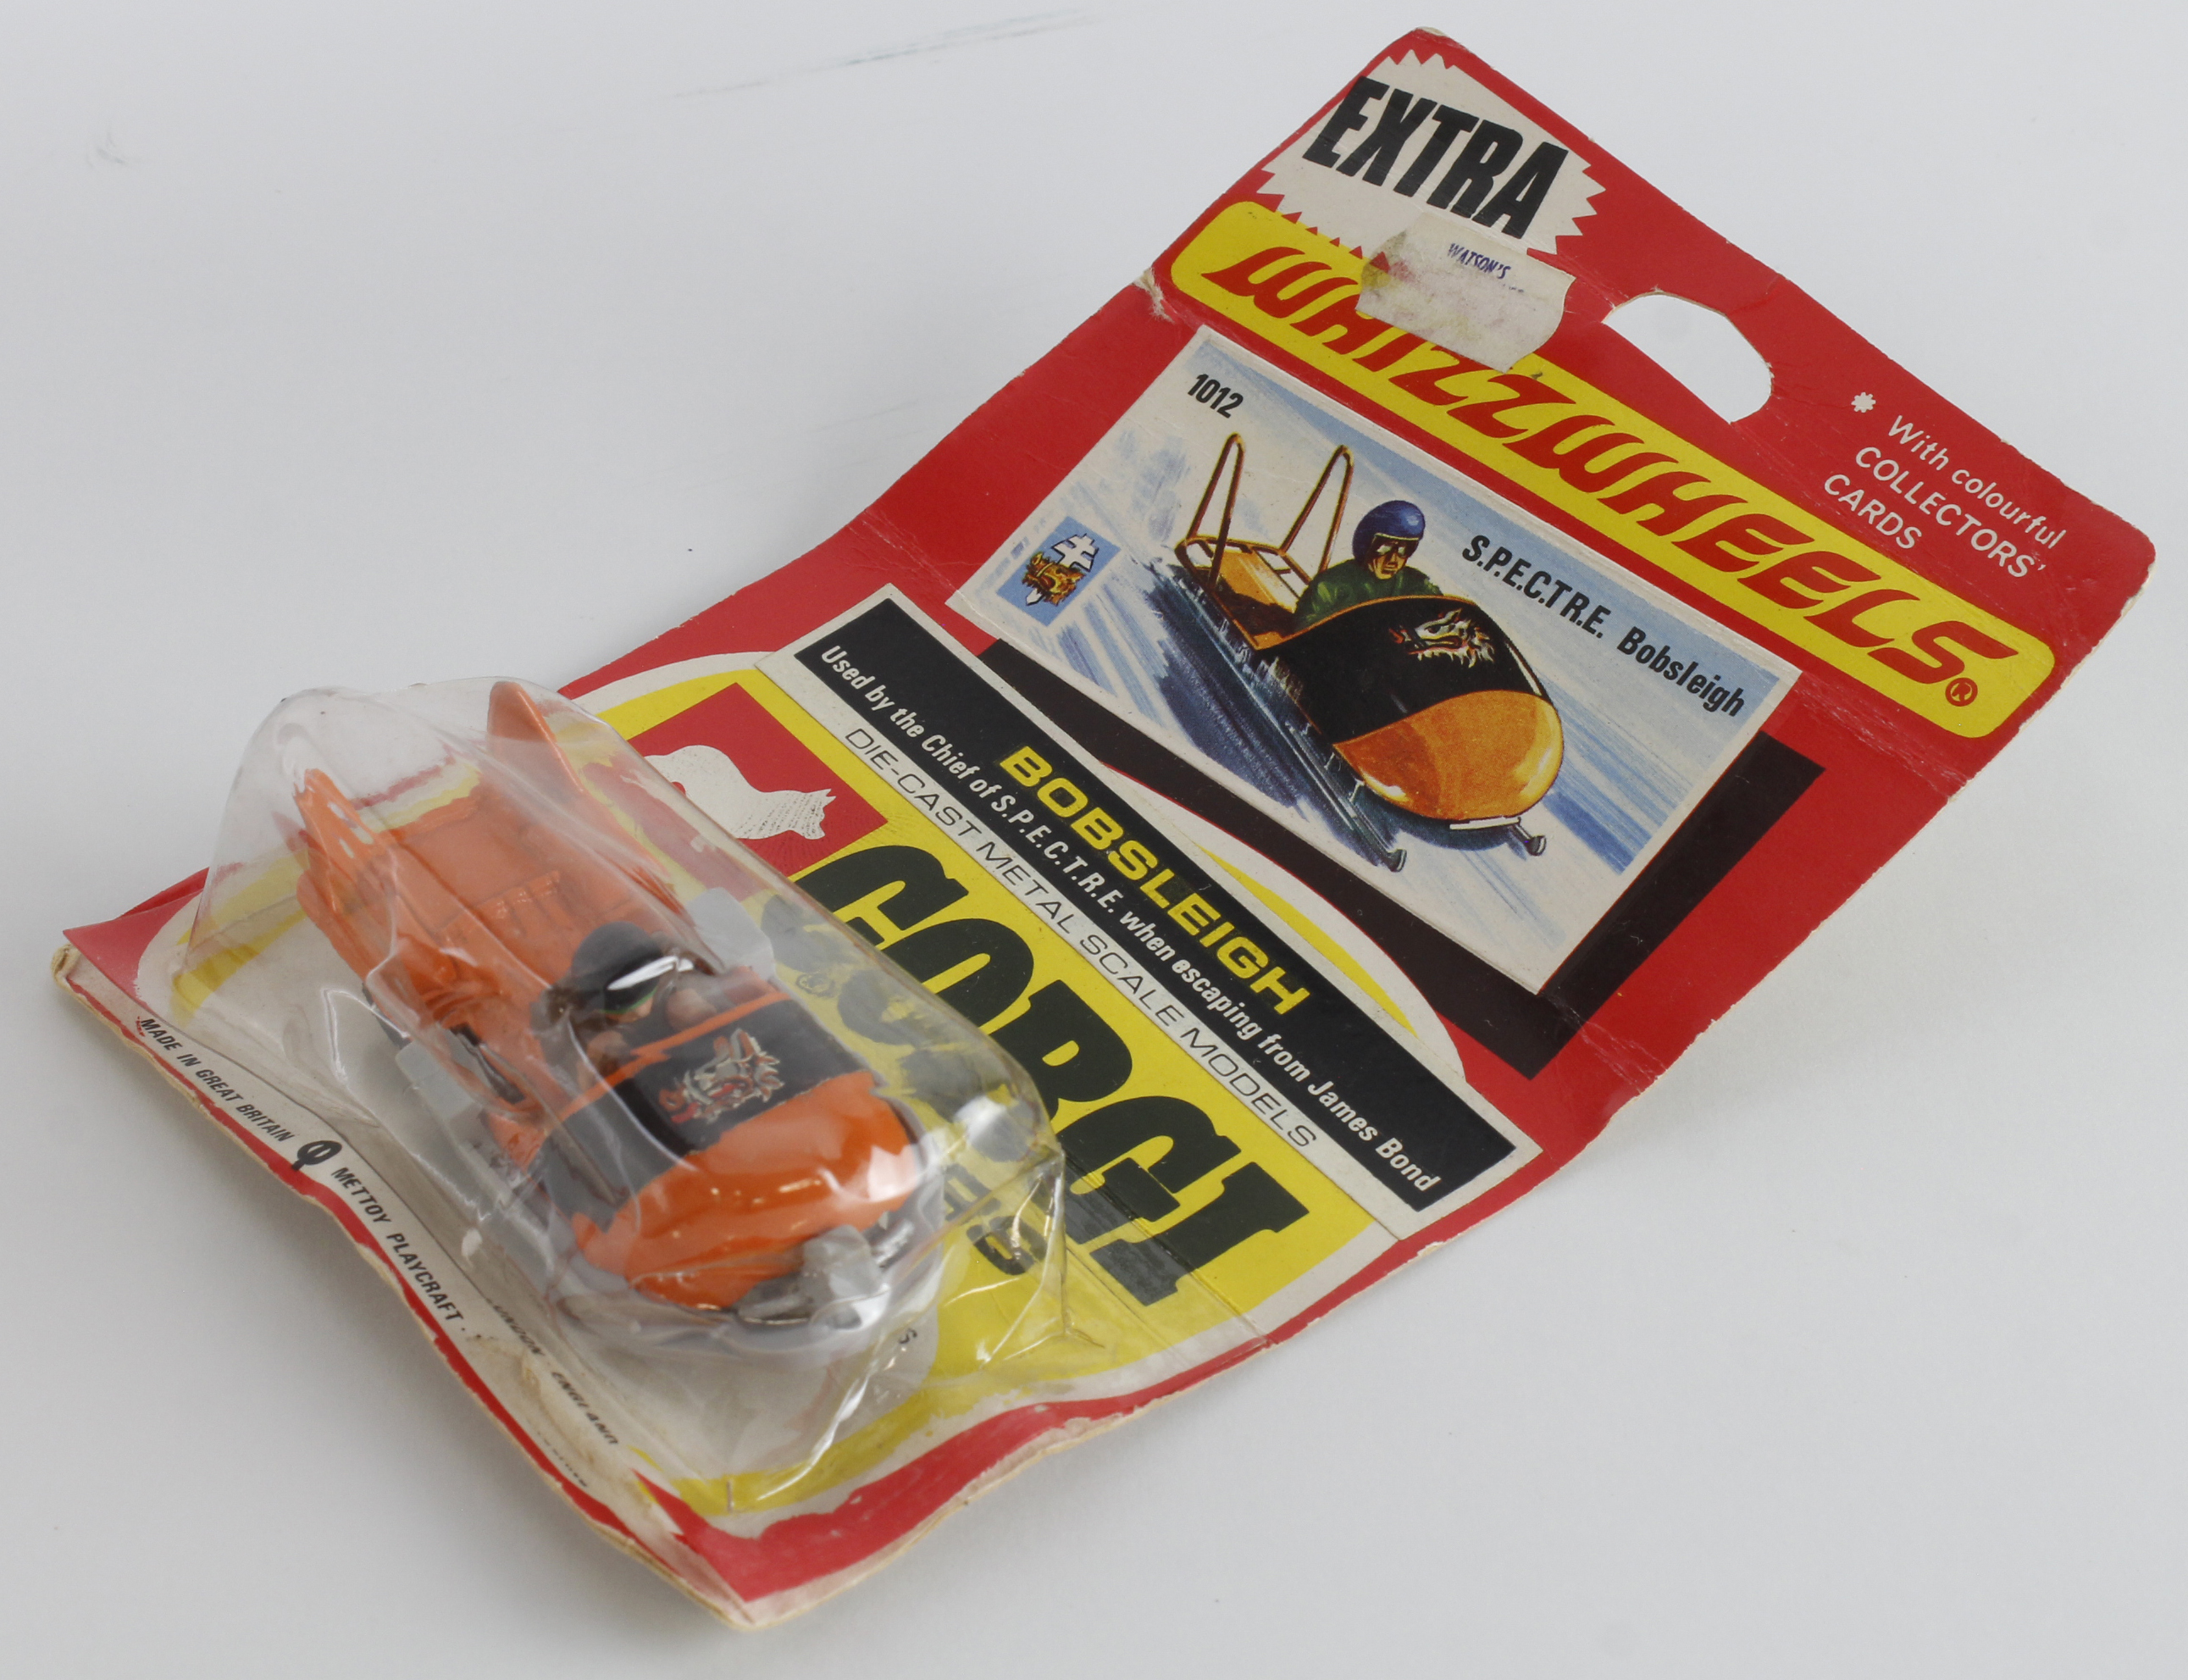 Corgi Toys, Whizzwheels 'S.P.E.C.T.R.E. Bobsleigh' (Used by the Chief when escaping from James